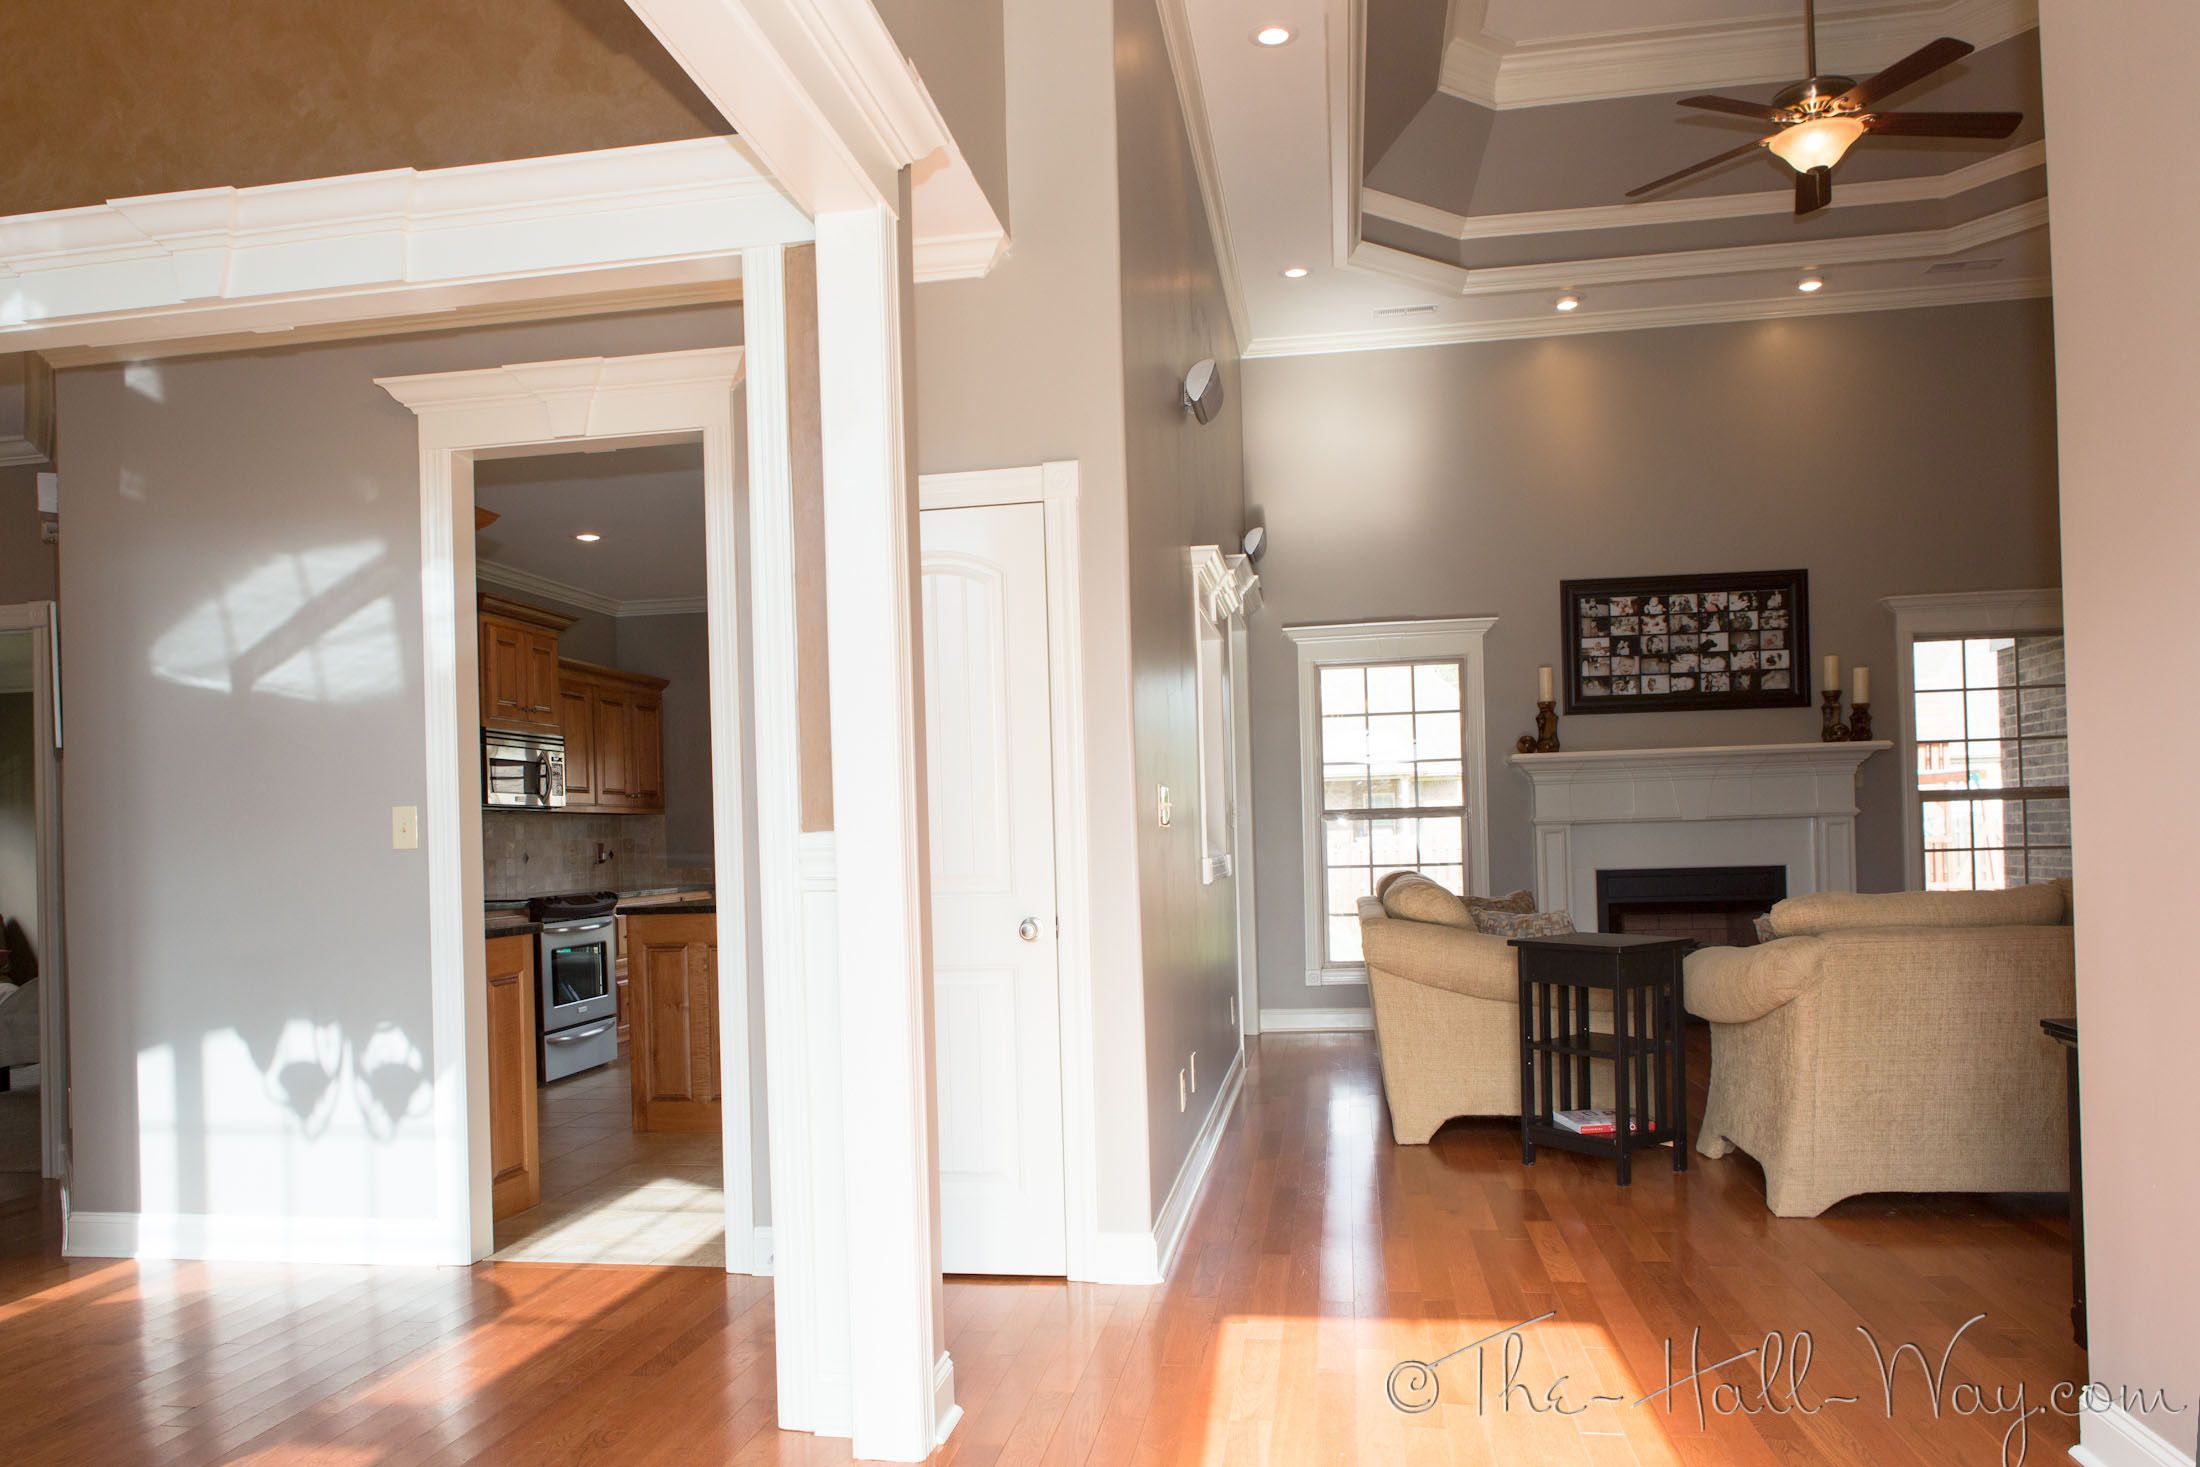 Summer Tour Of Homes | The Hall Way Within Brushed Pearl Over The Door Wall Decor (View 25 of 30)